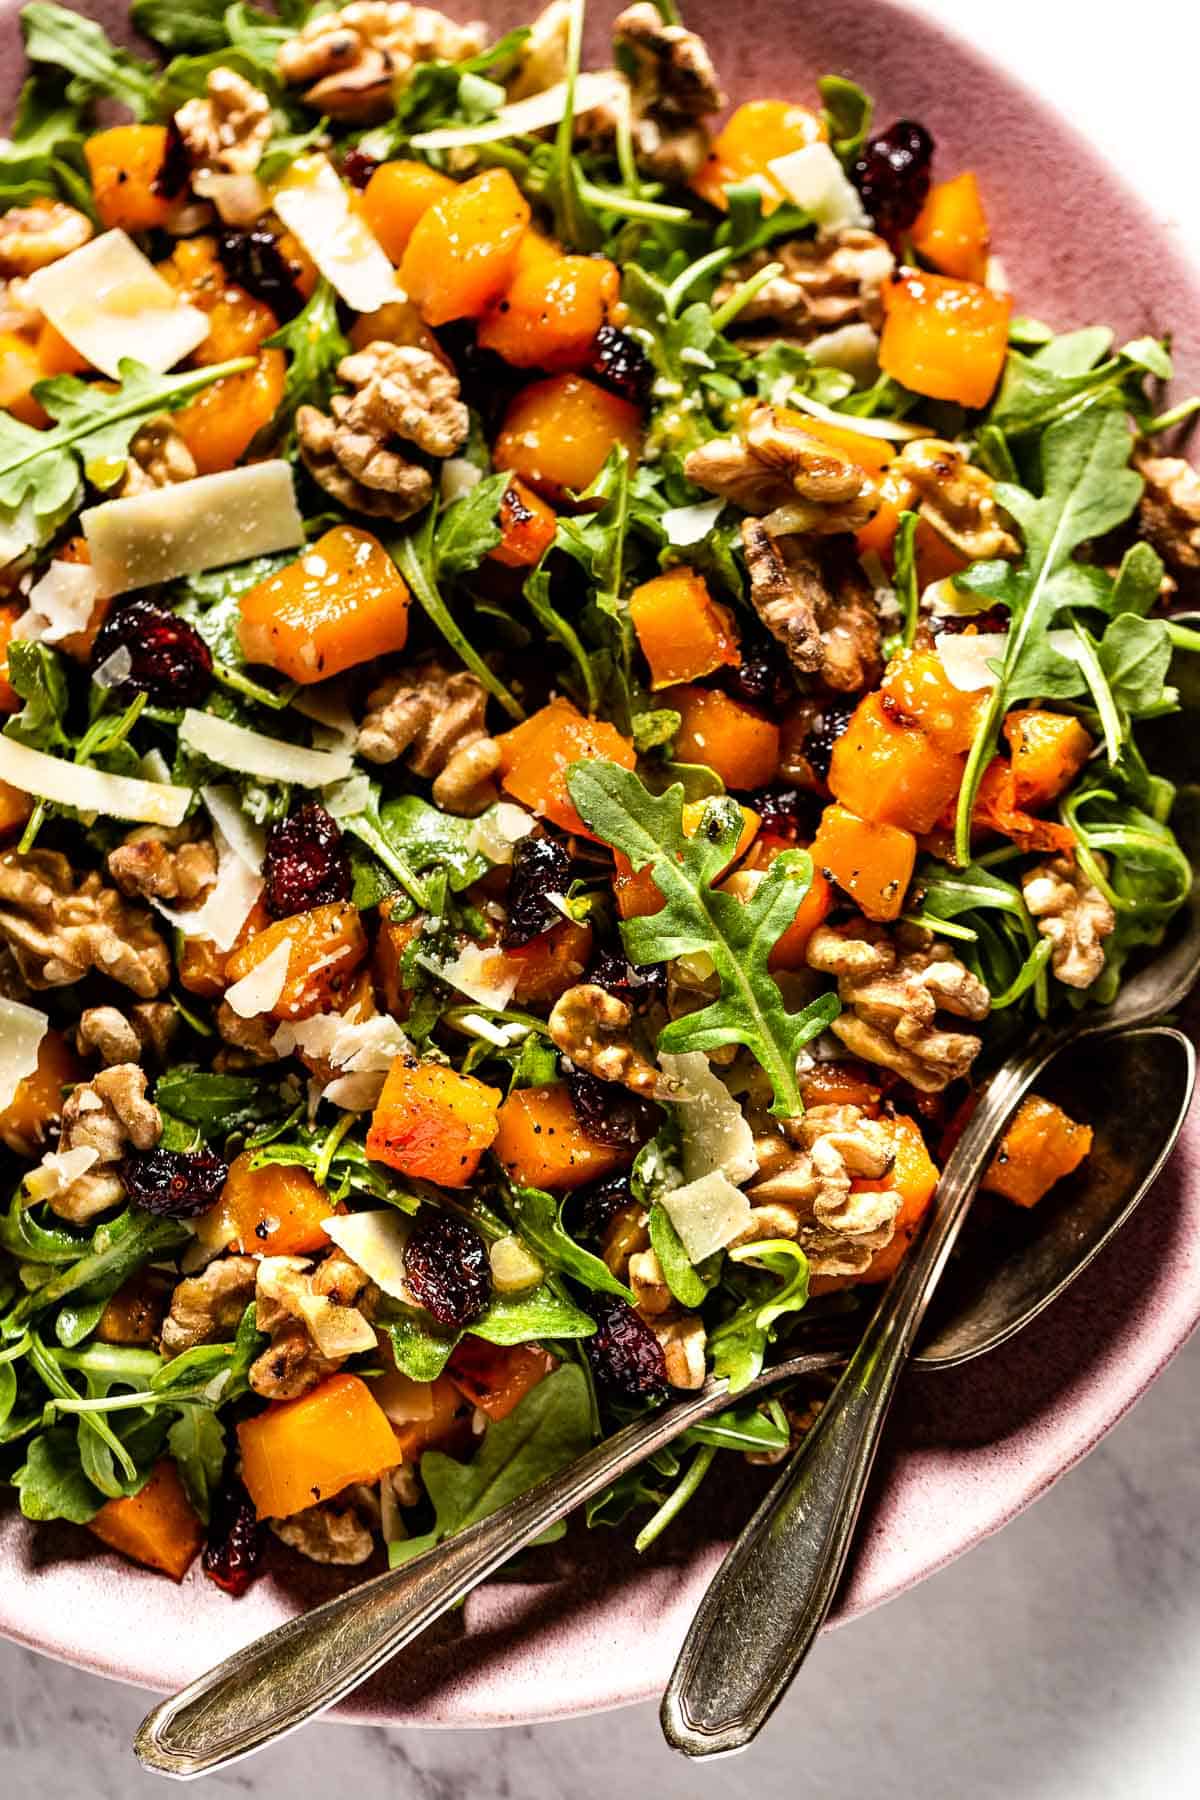 Ina Garten's Butternut squash salad on a plate from the top view